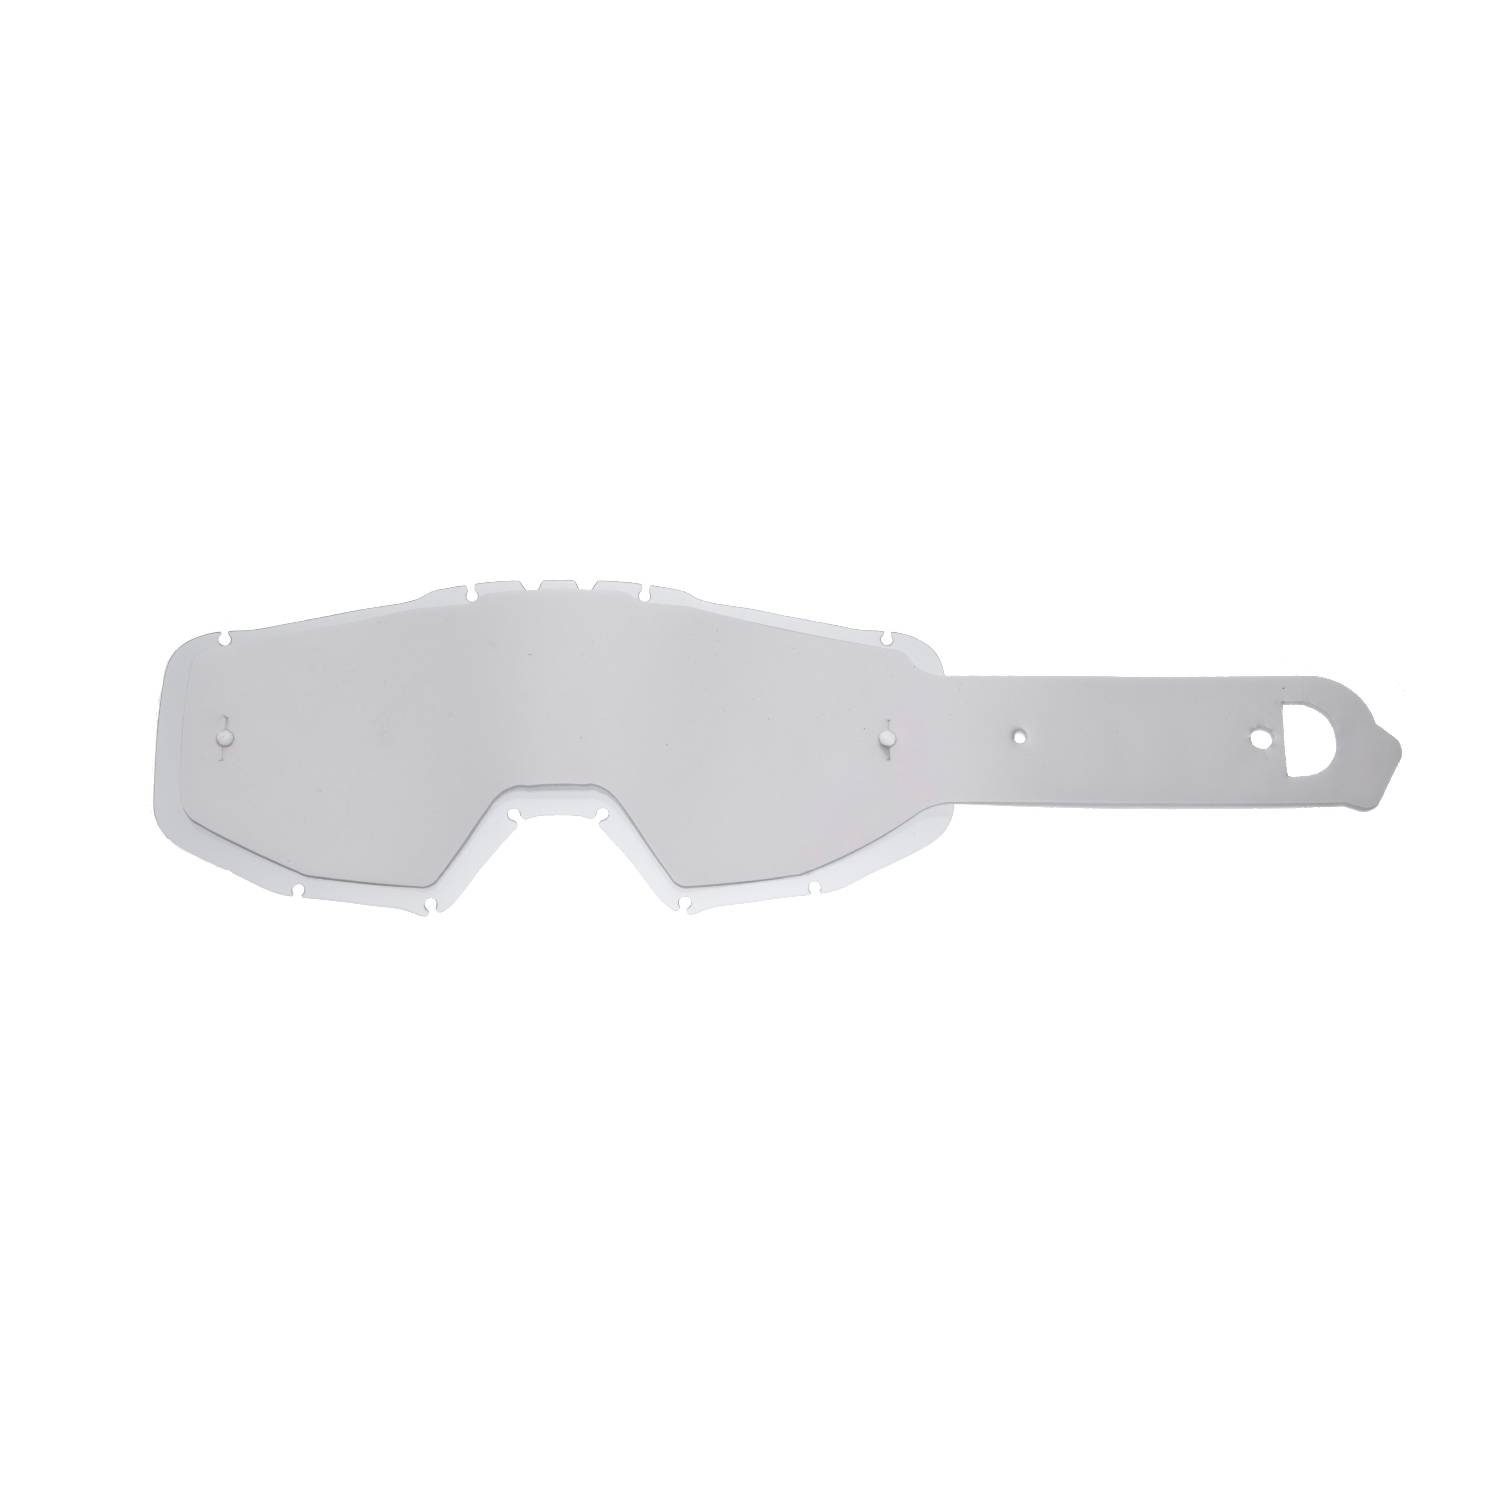 Clear lens + 10 Tear-OFFS (Combo) compatible for Just1 Iris / Vitro goggle